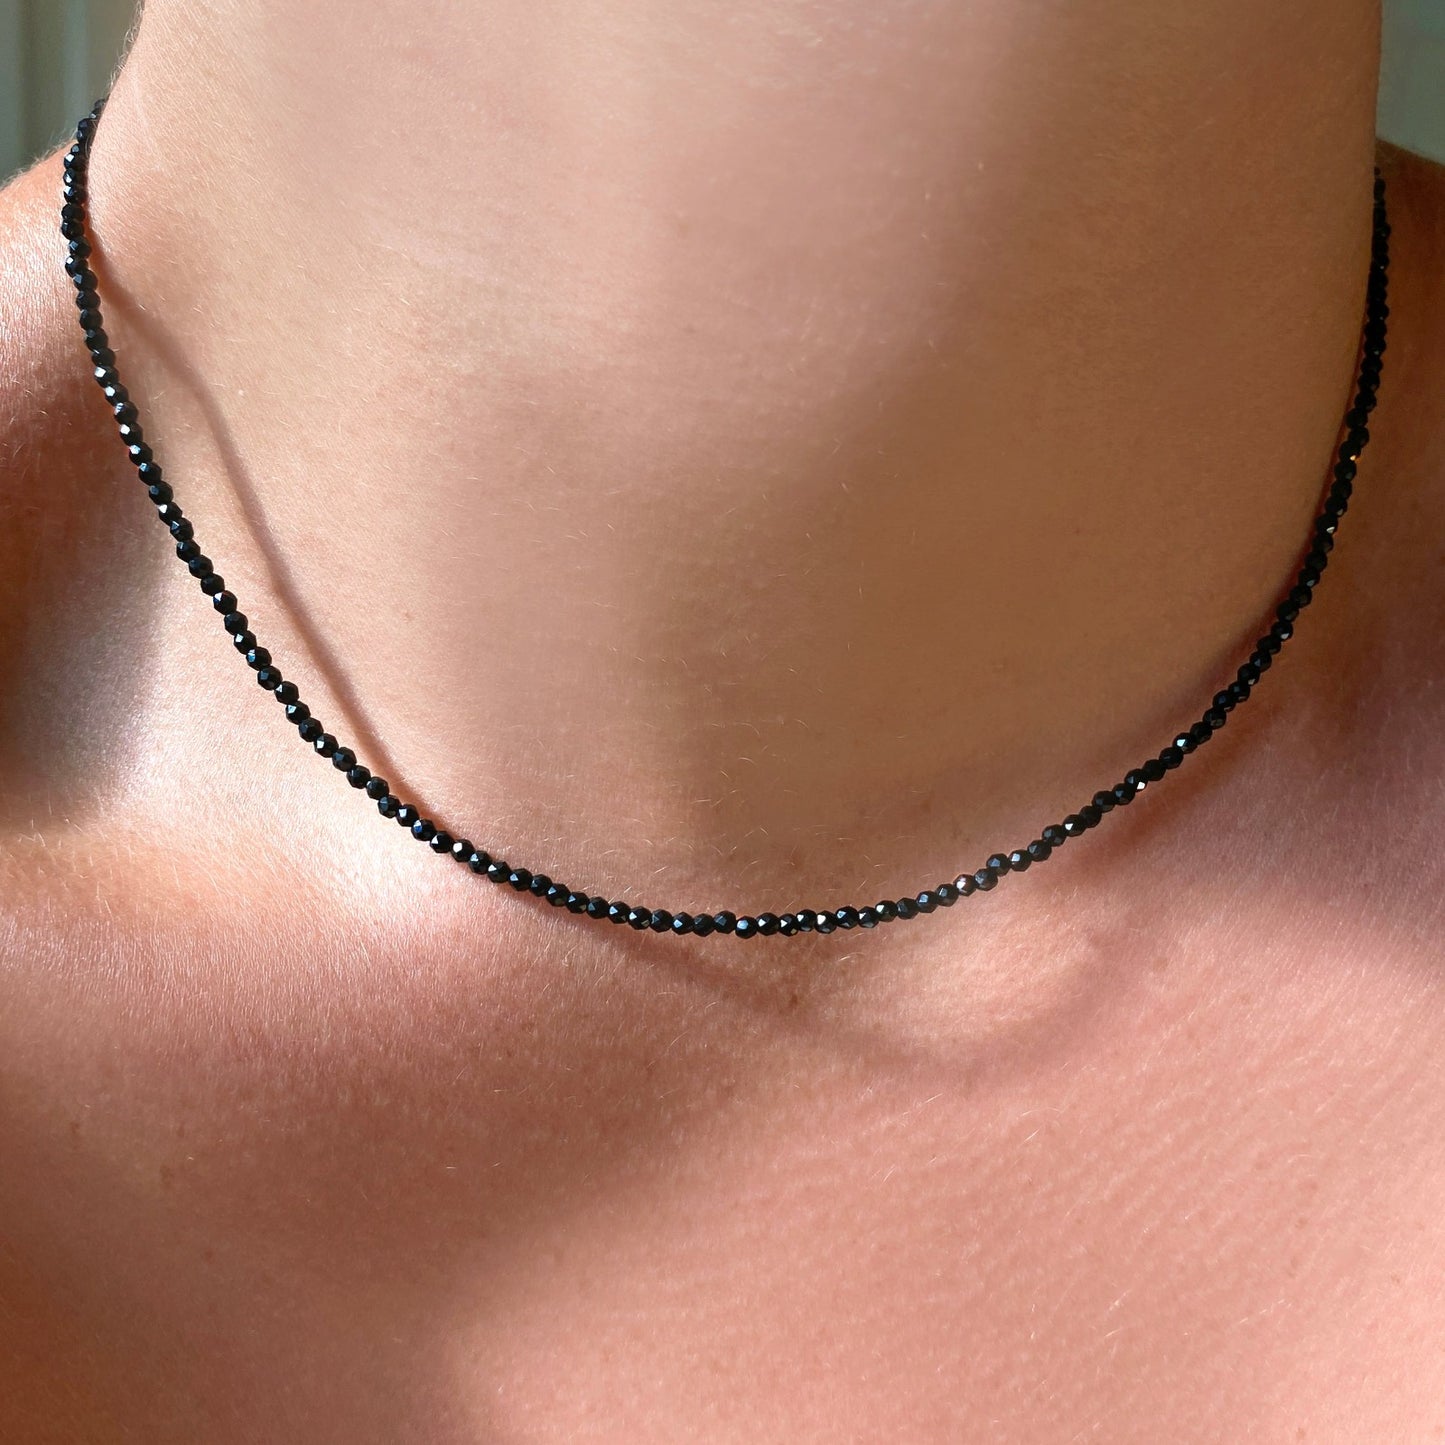 Shimmering beaded necklace made of 2mm faceted opals in shades of black on a gold linking lobster clasp.